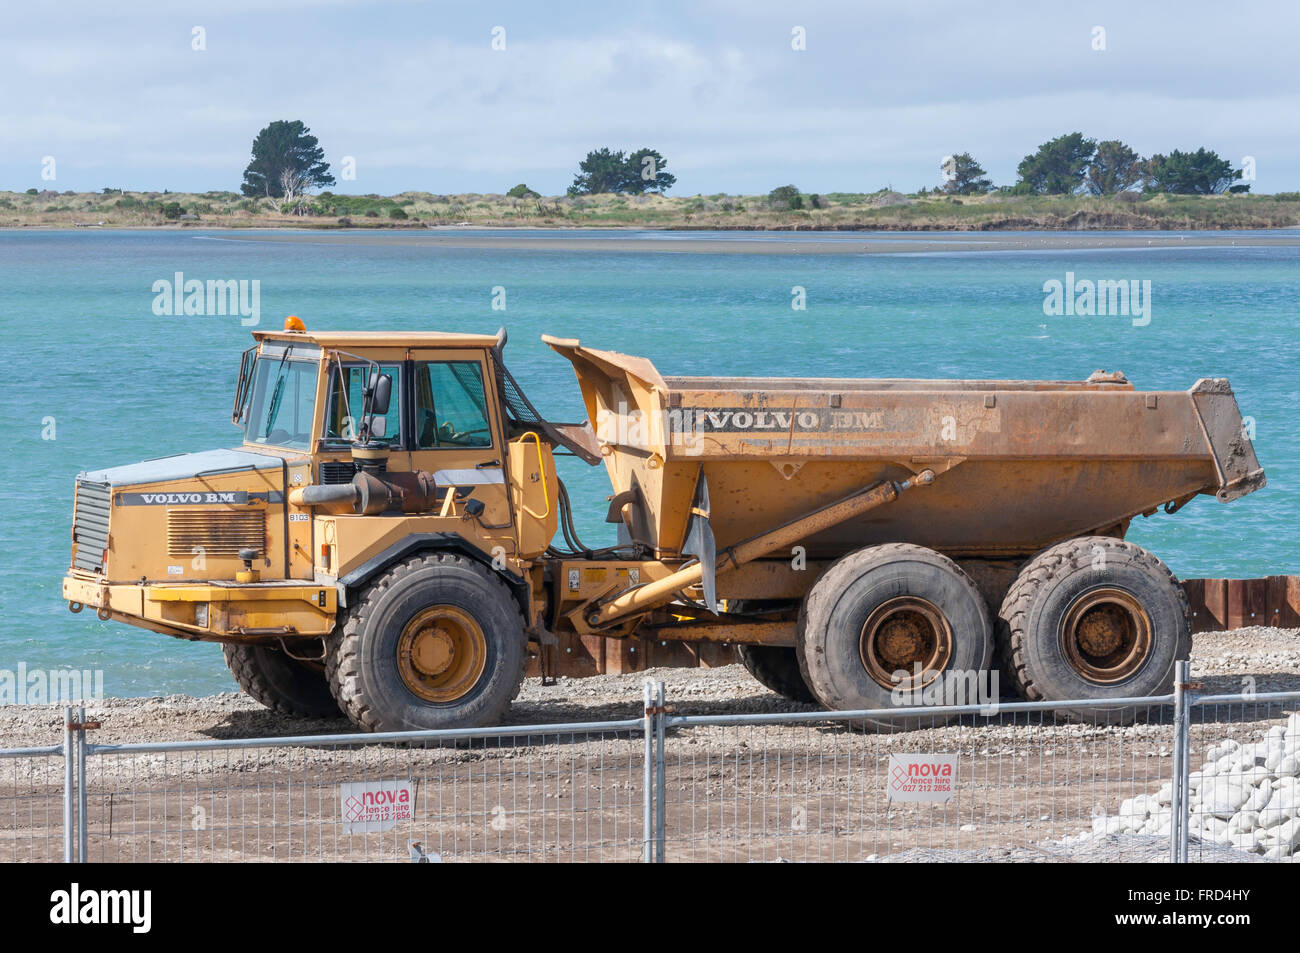 Volvo BM Articulated Dump Truck on construction site, Redcliffs, Christchurch, Canterbury Region, South Island, New Zealand Stock Photo